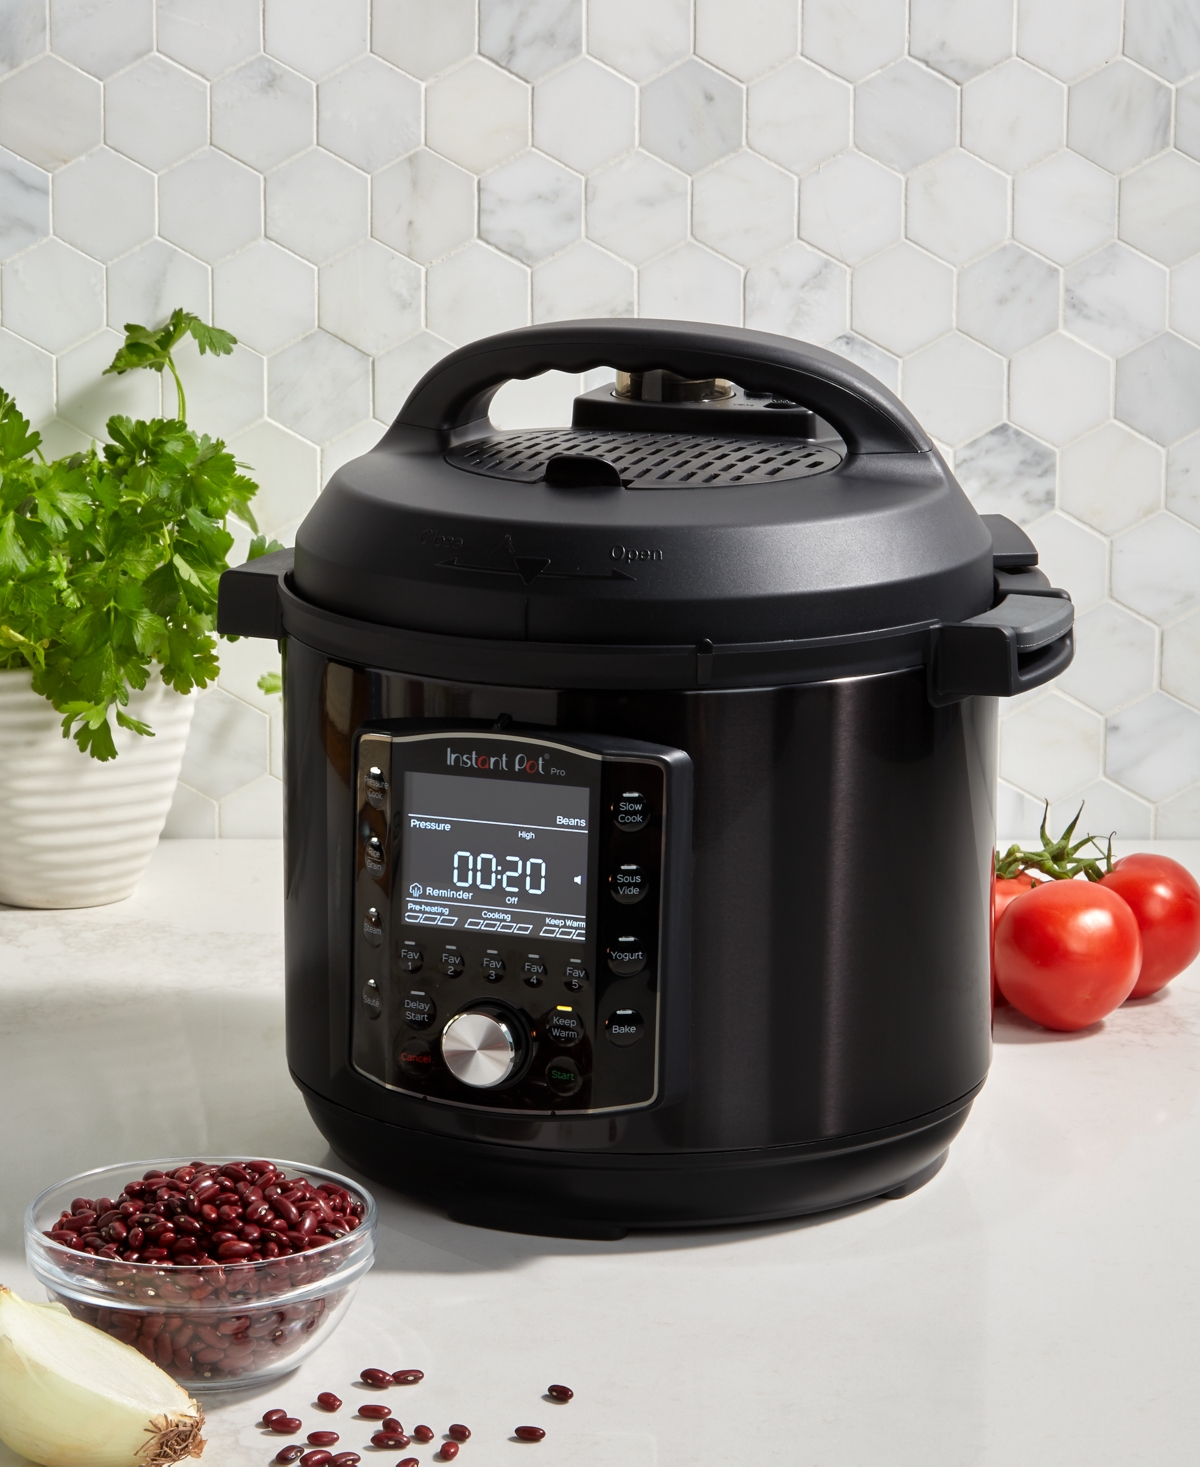 Instant Pot's new $170 Pro Plus is WiFi-connected and offers guided cooking